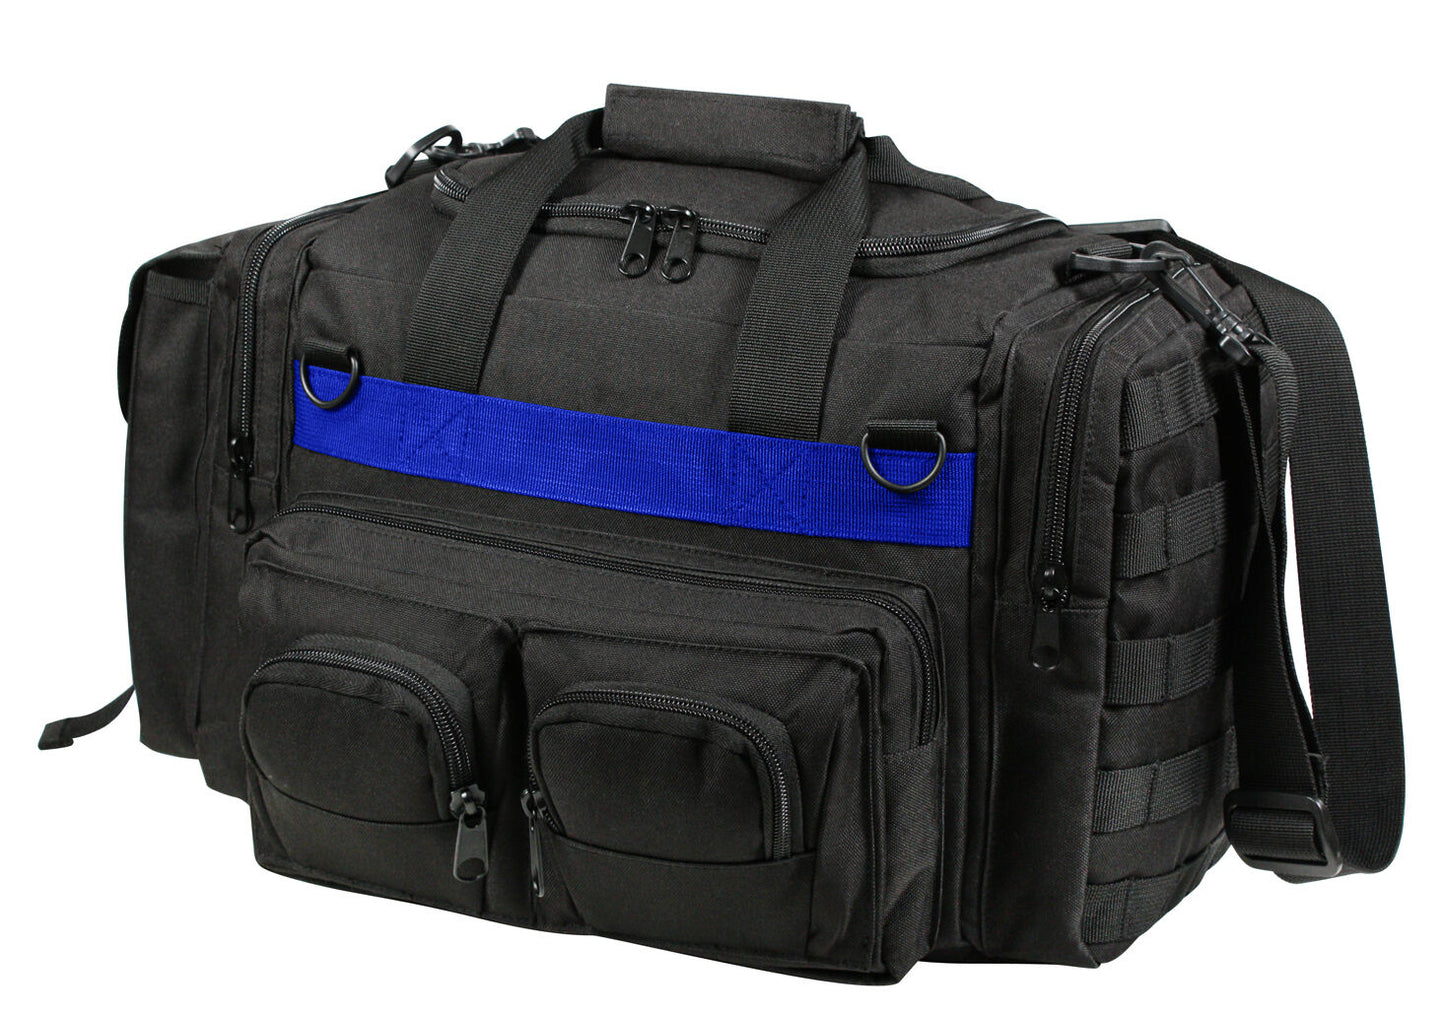 Rothco Thin Blue Line Concealed Carry Range Bag - Black